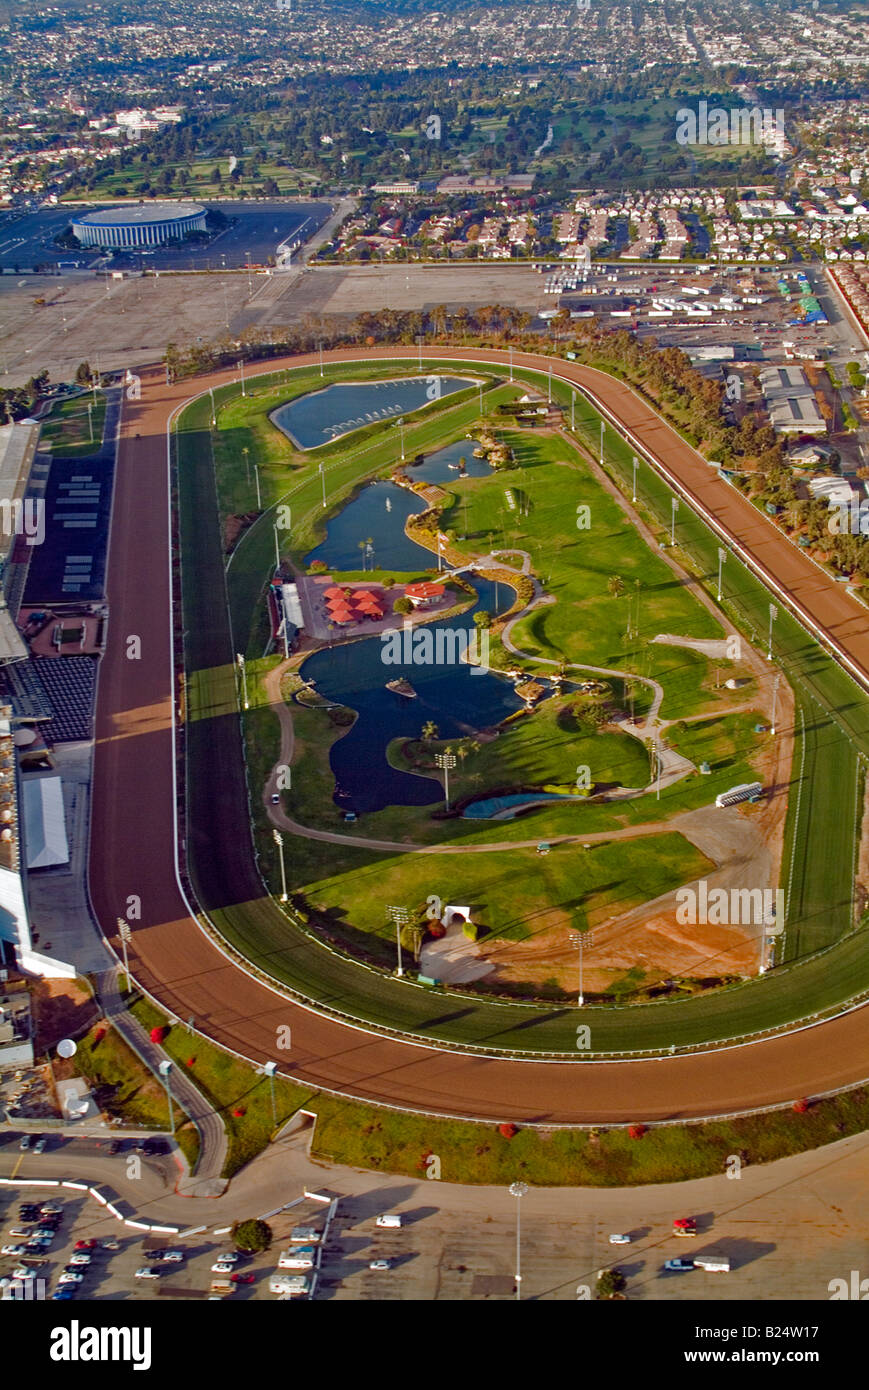 Hollywood Park is a thoroughbred race course  in Inglewood, California, USA aerial view Stock Photo